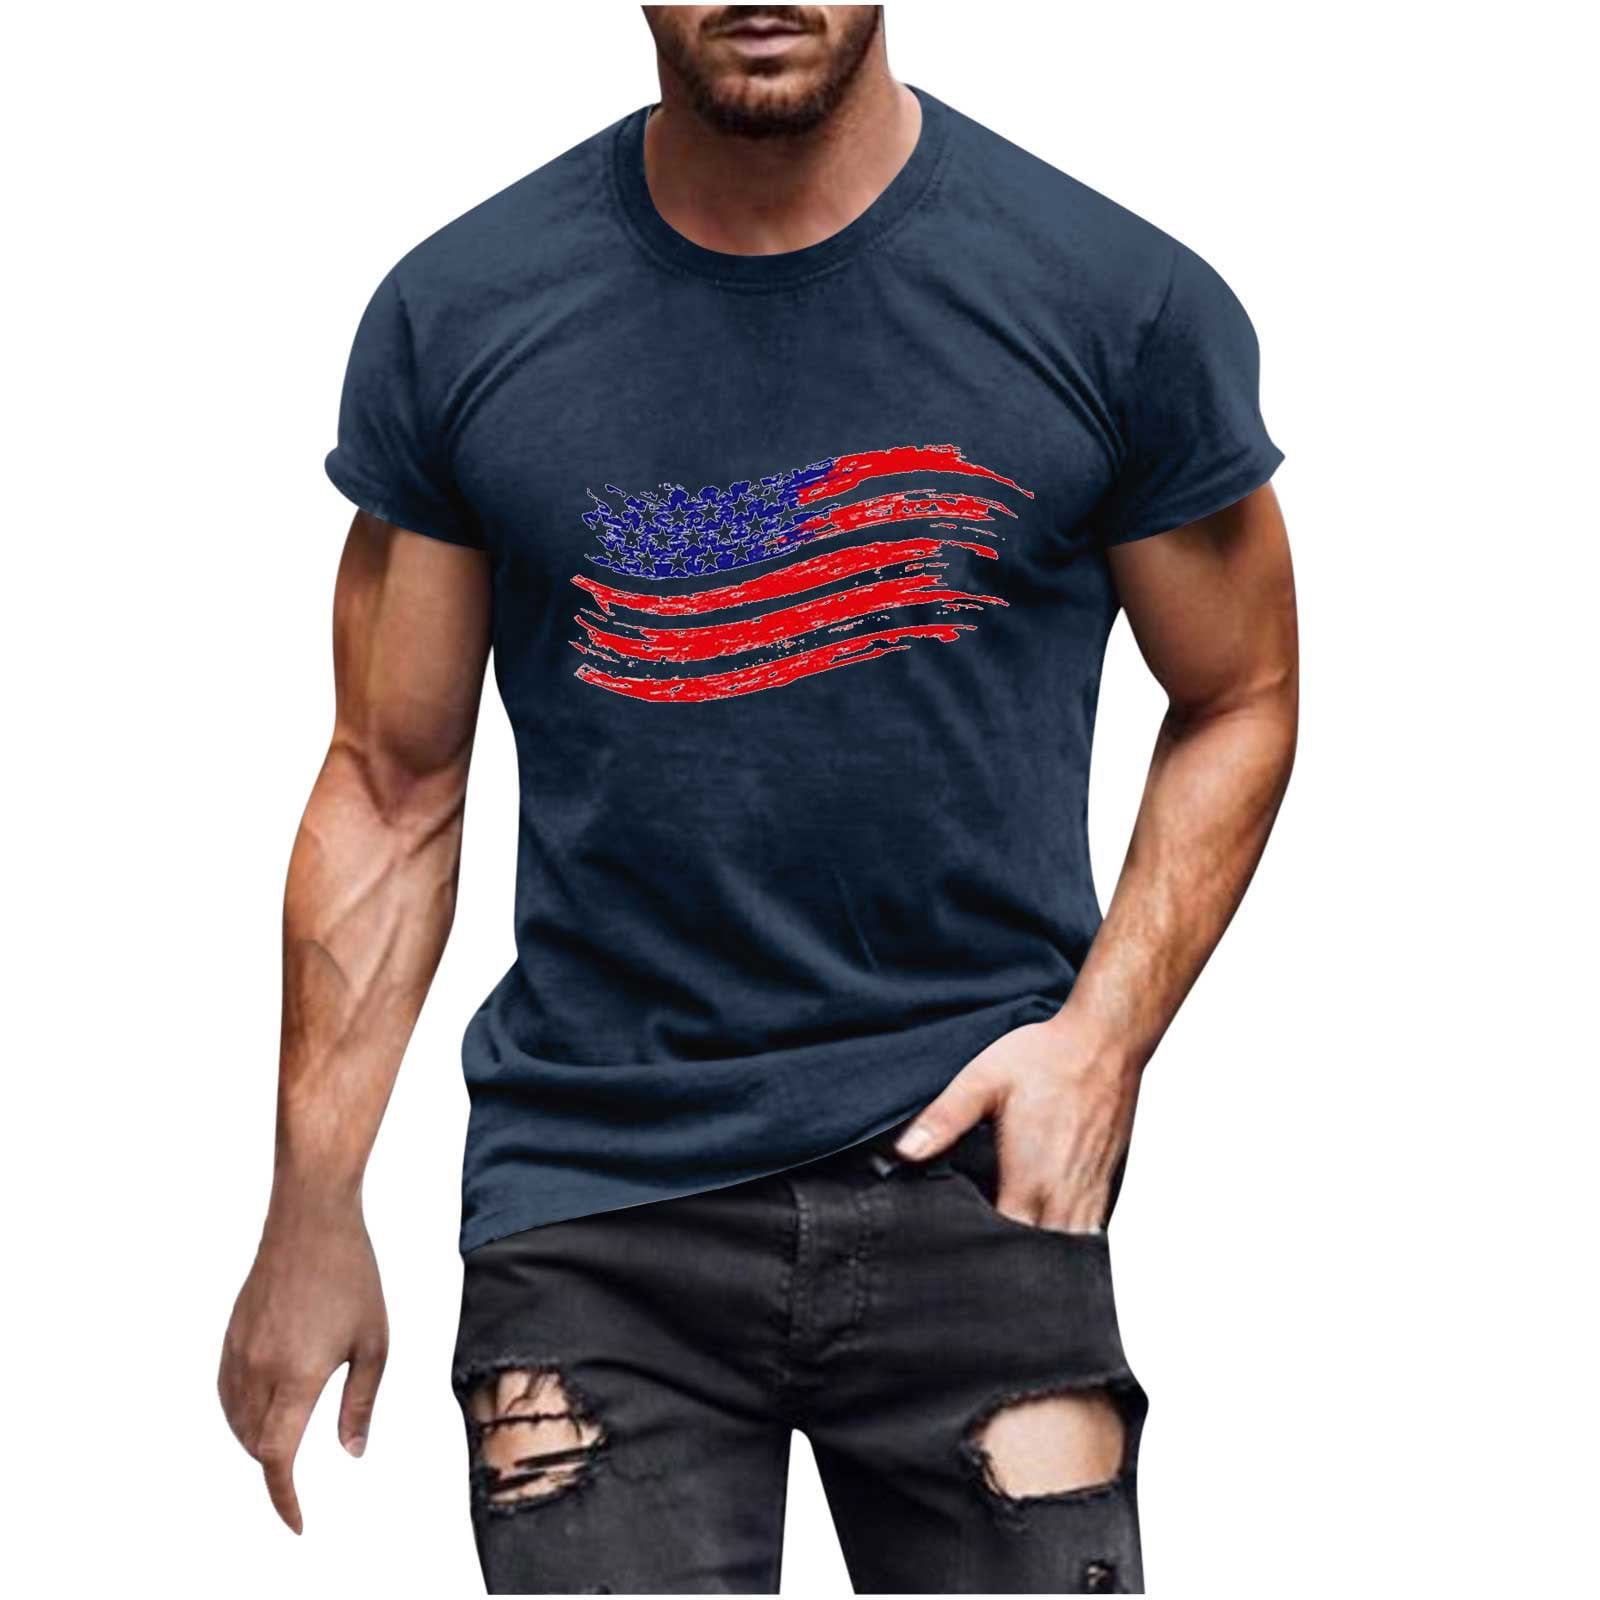 XMMSWDLA Pro Club T Shirts for Men Navy Shirt Men Casual Round Neck 3d  Digital Printing Pullover Fitness Sports Shorts Sleeves T Shirt Blouse Men